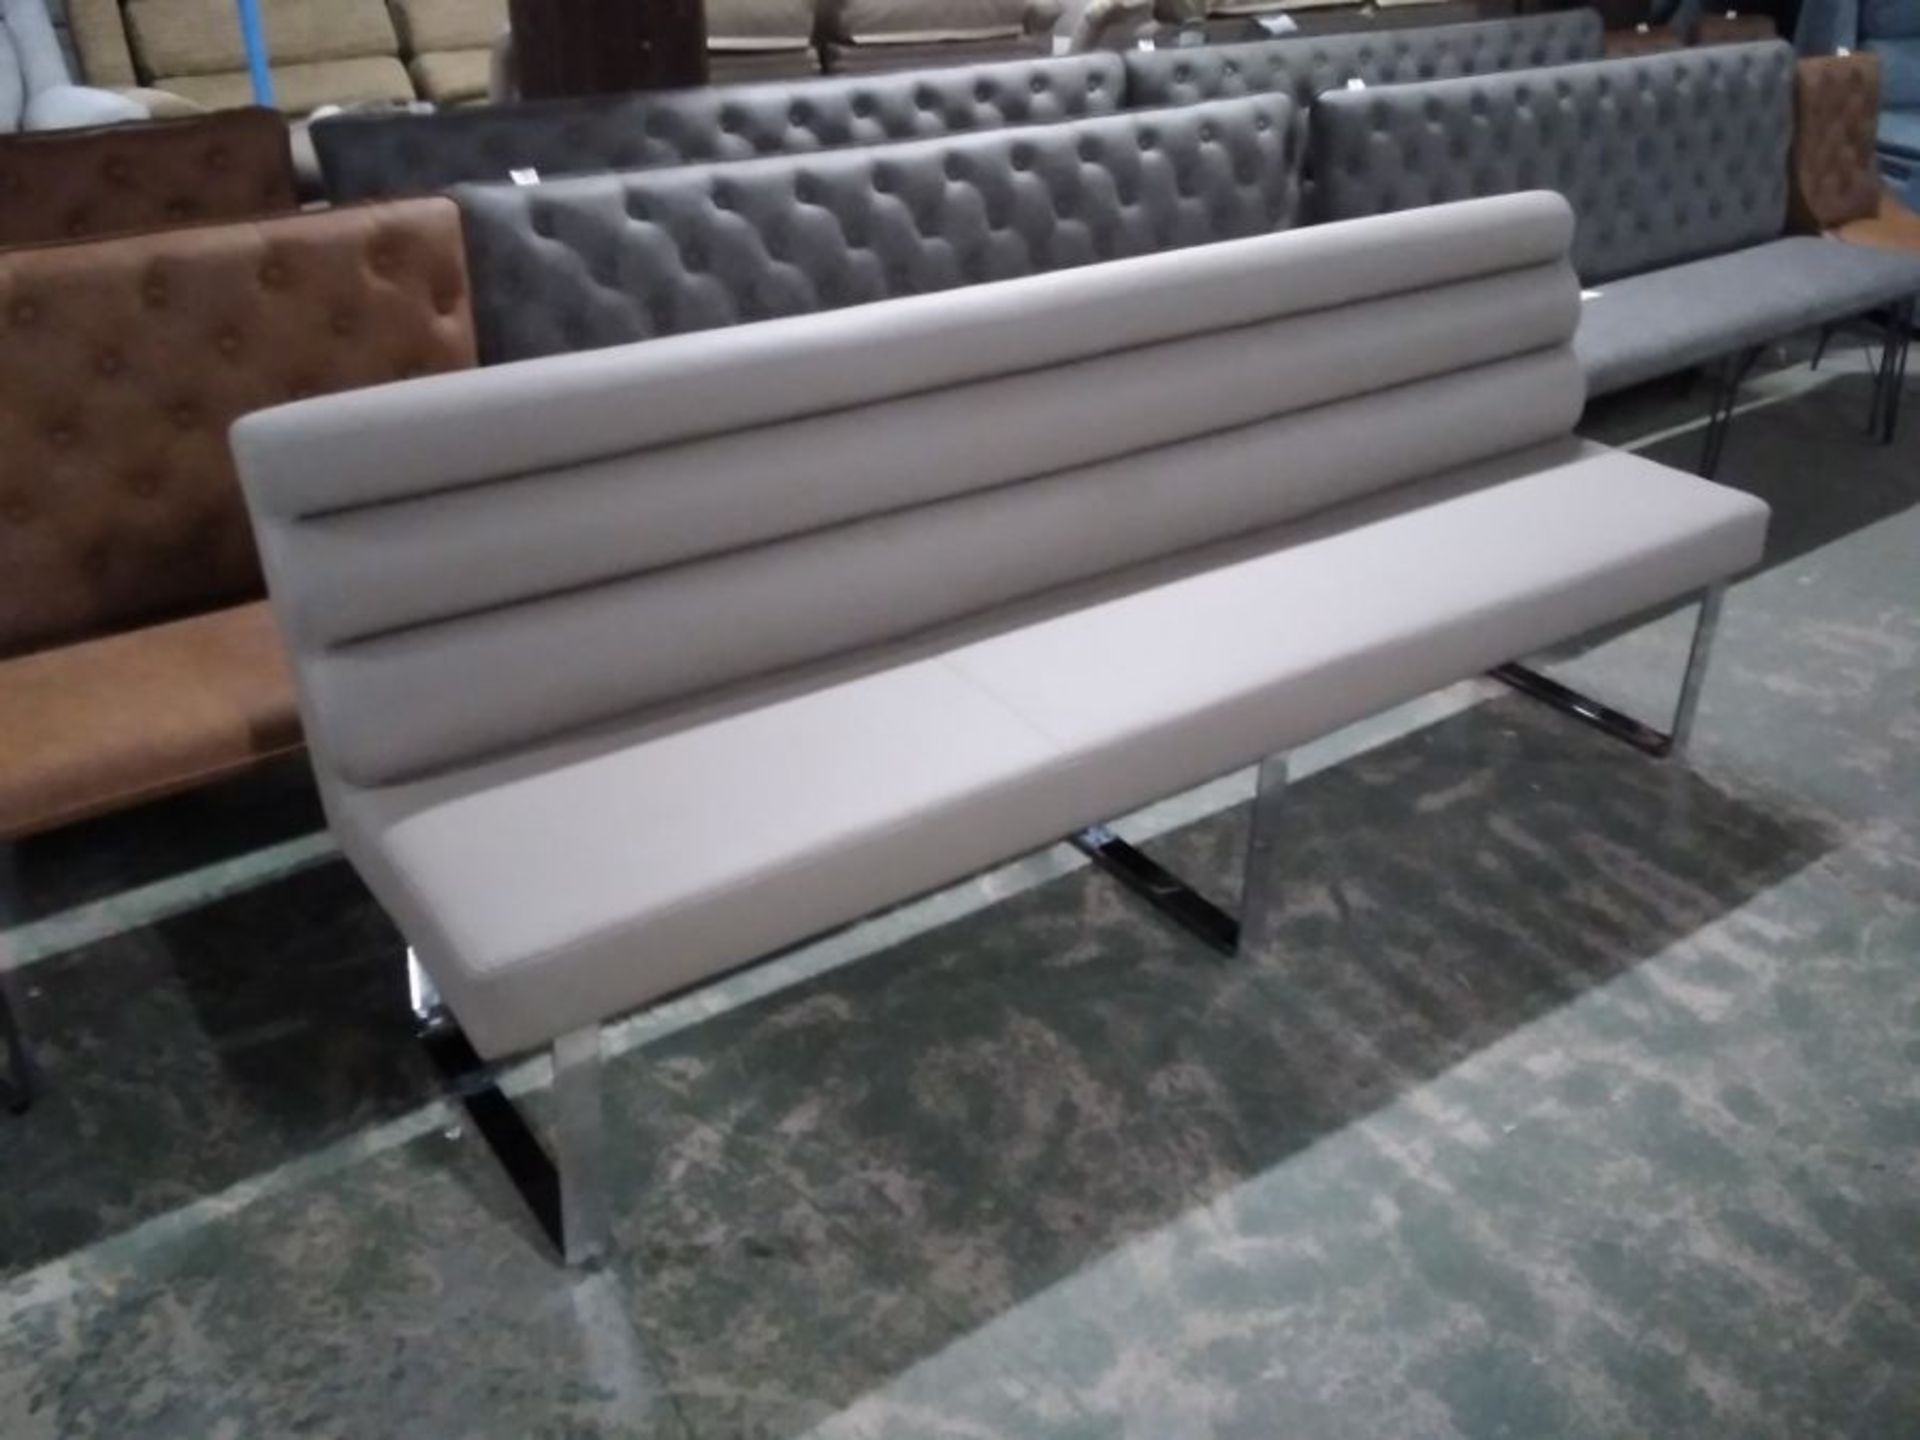 GREY LEATHER BENCH (RIP ON SIDE)